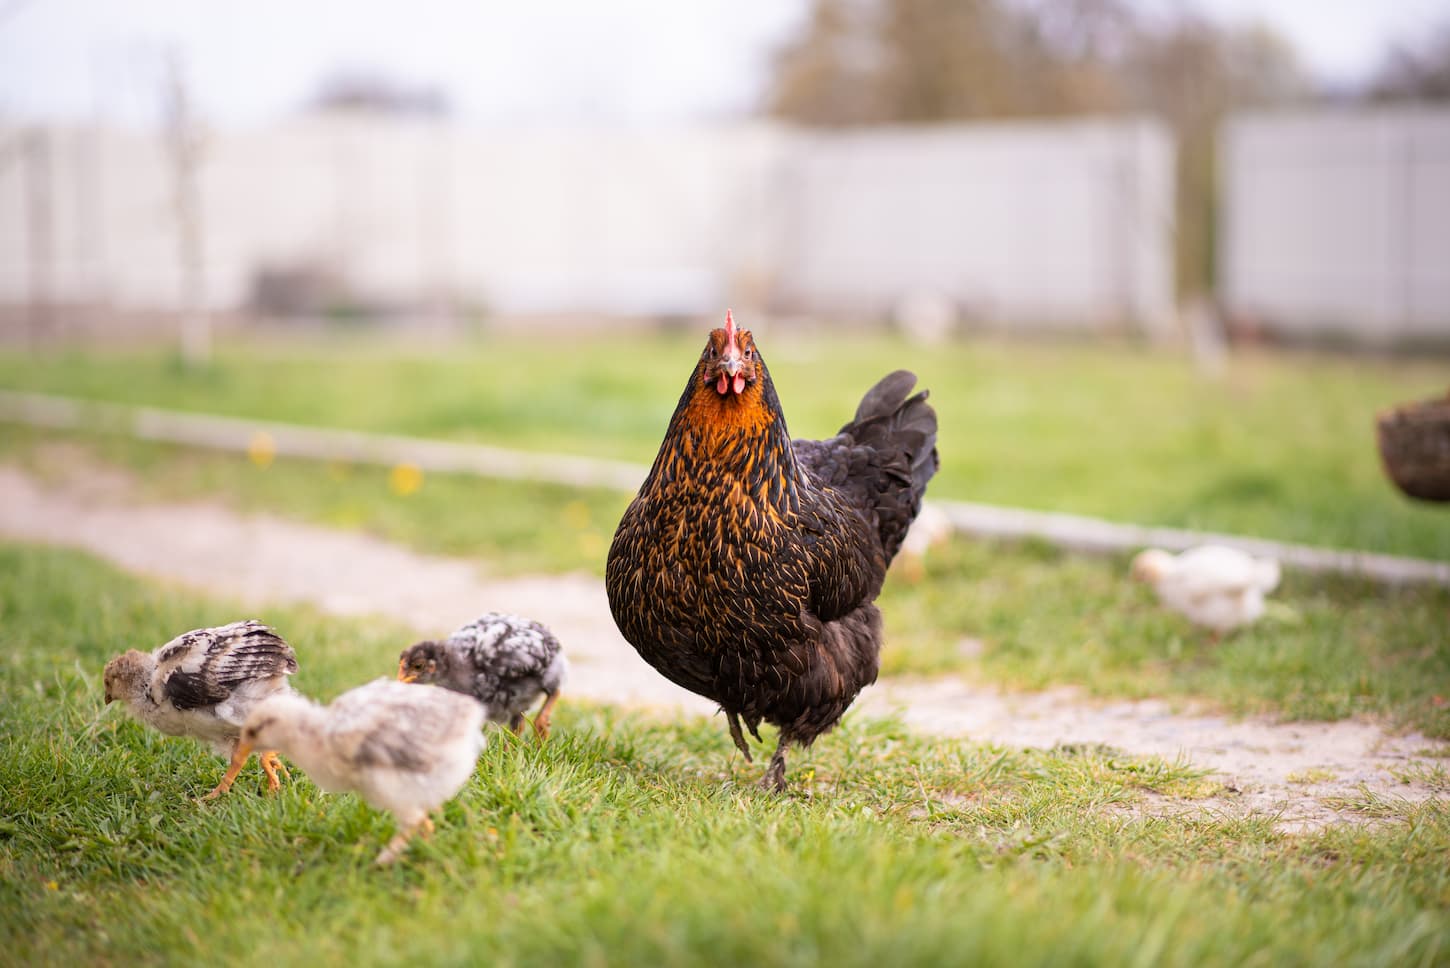 An image of a broody hen with her few weeks old chicks in the yard.